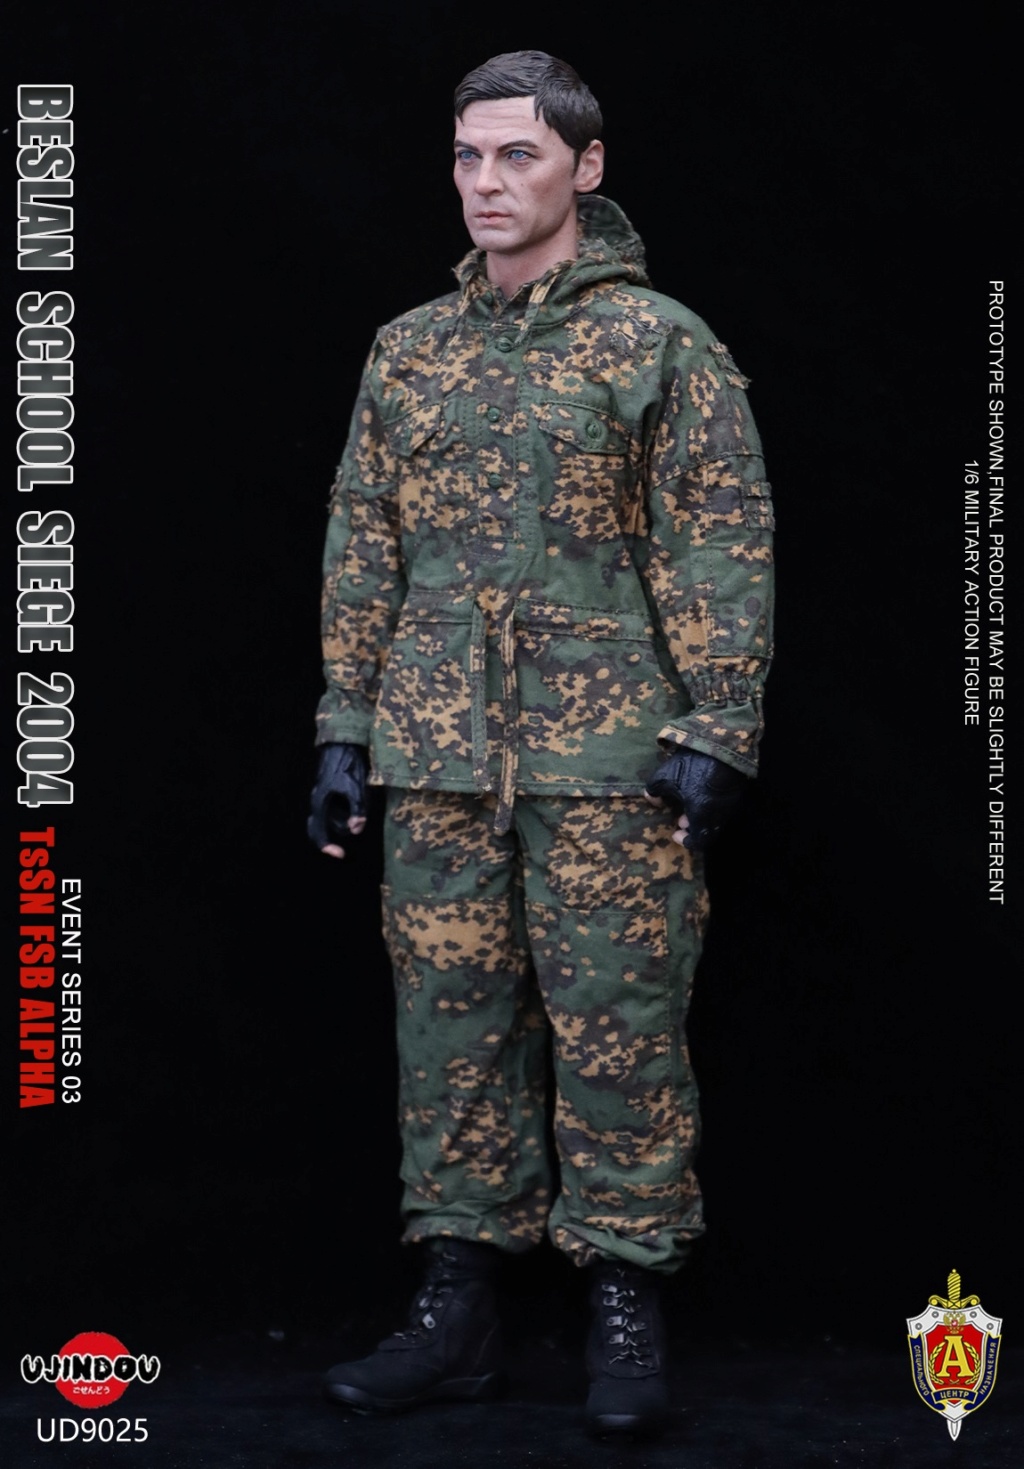 NEW PRODUCT: UJINDOU: 1/6 FSB Special Forces of the Russian Federal Security Service - Beslan Incident 2004 #UD9025 11141510